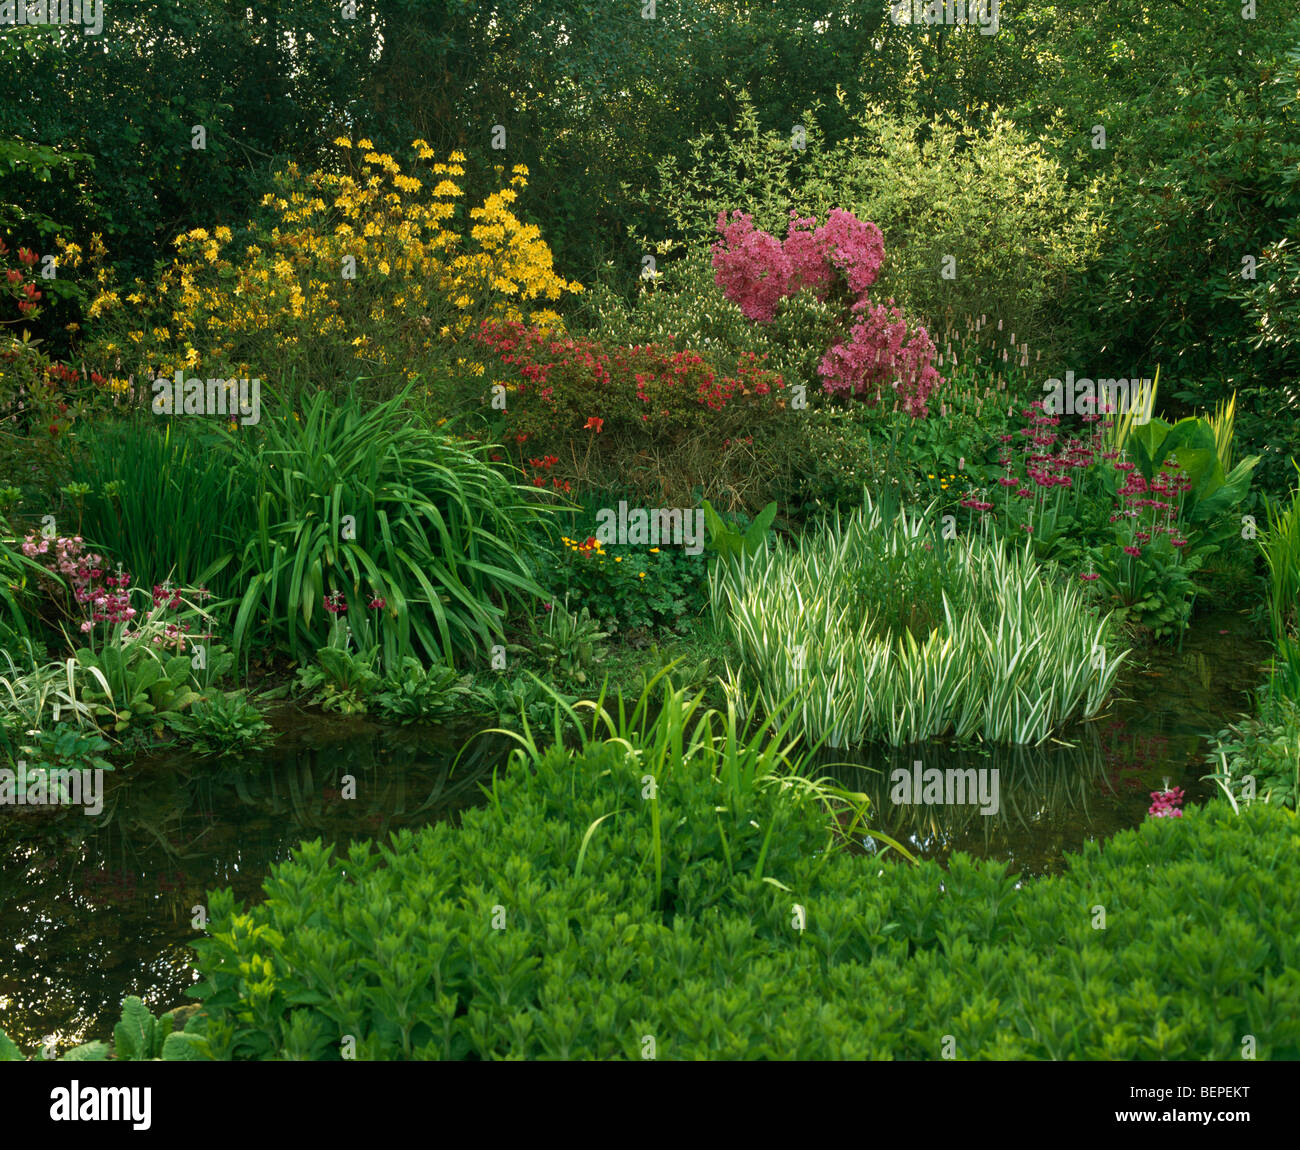 Spring country garden with primulas, bistort, grasses and azaleas growing on bank of small stream Stock Photo